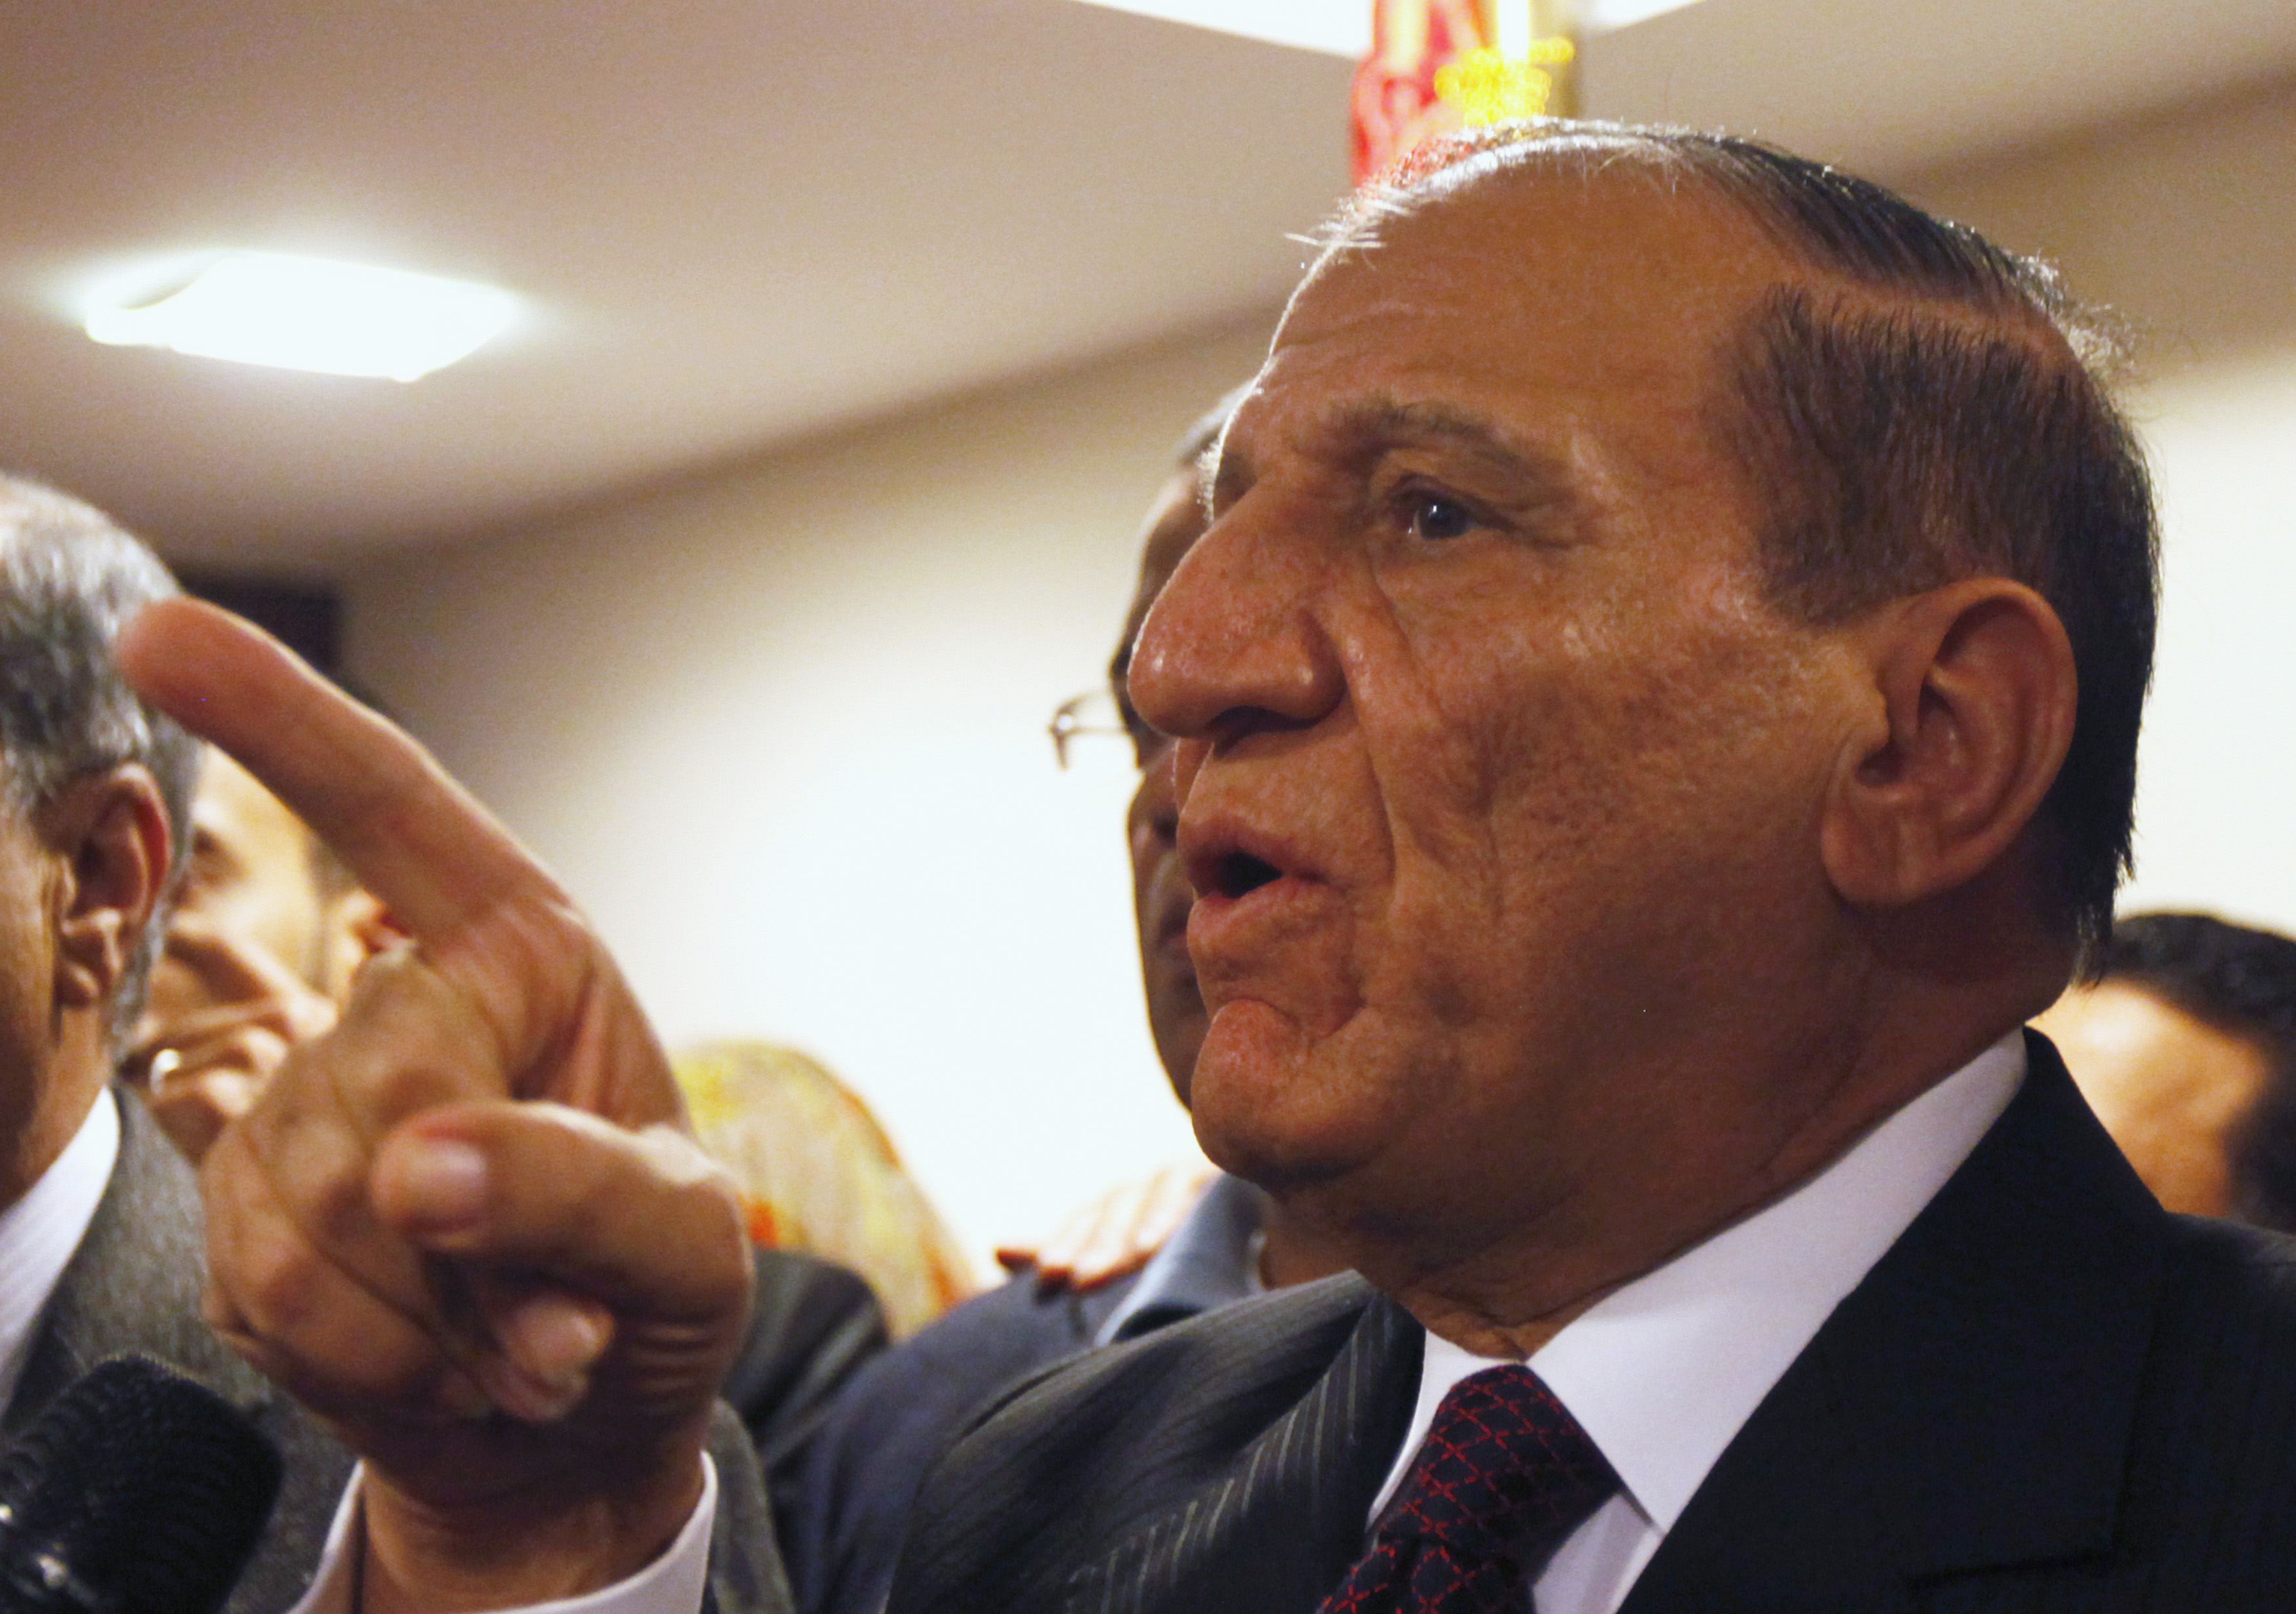 Egypt's former army chief of staff Sami Anan, speaks during news conference at his office in Cairo